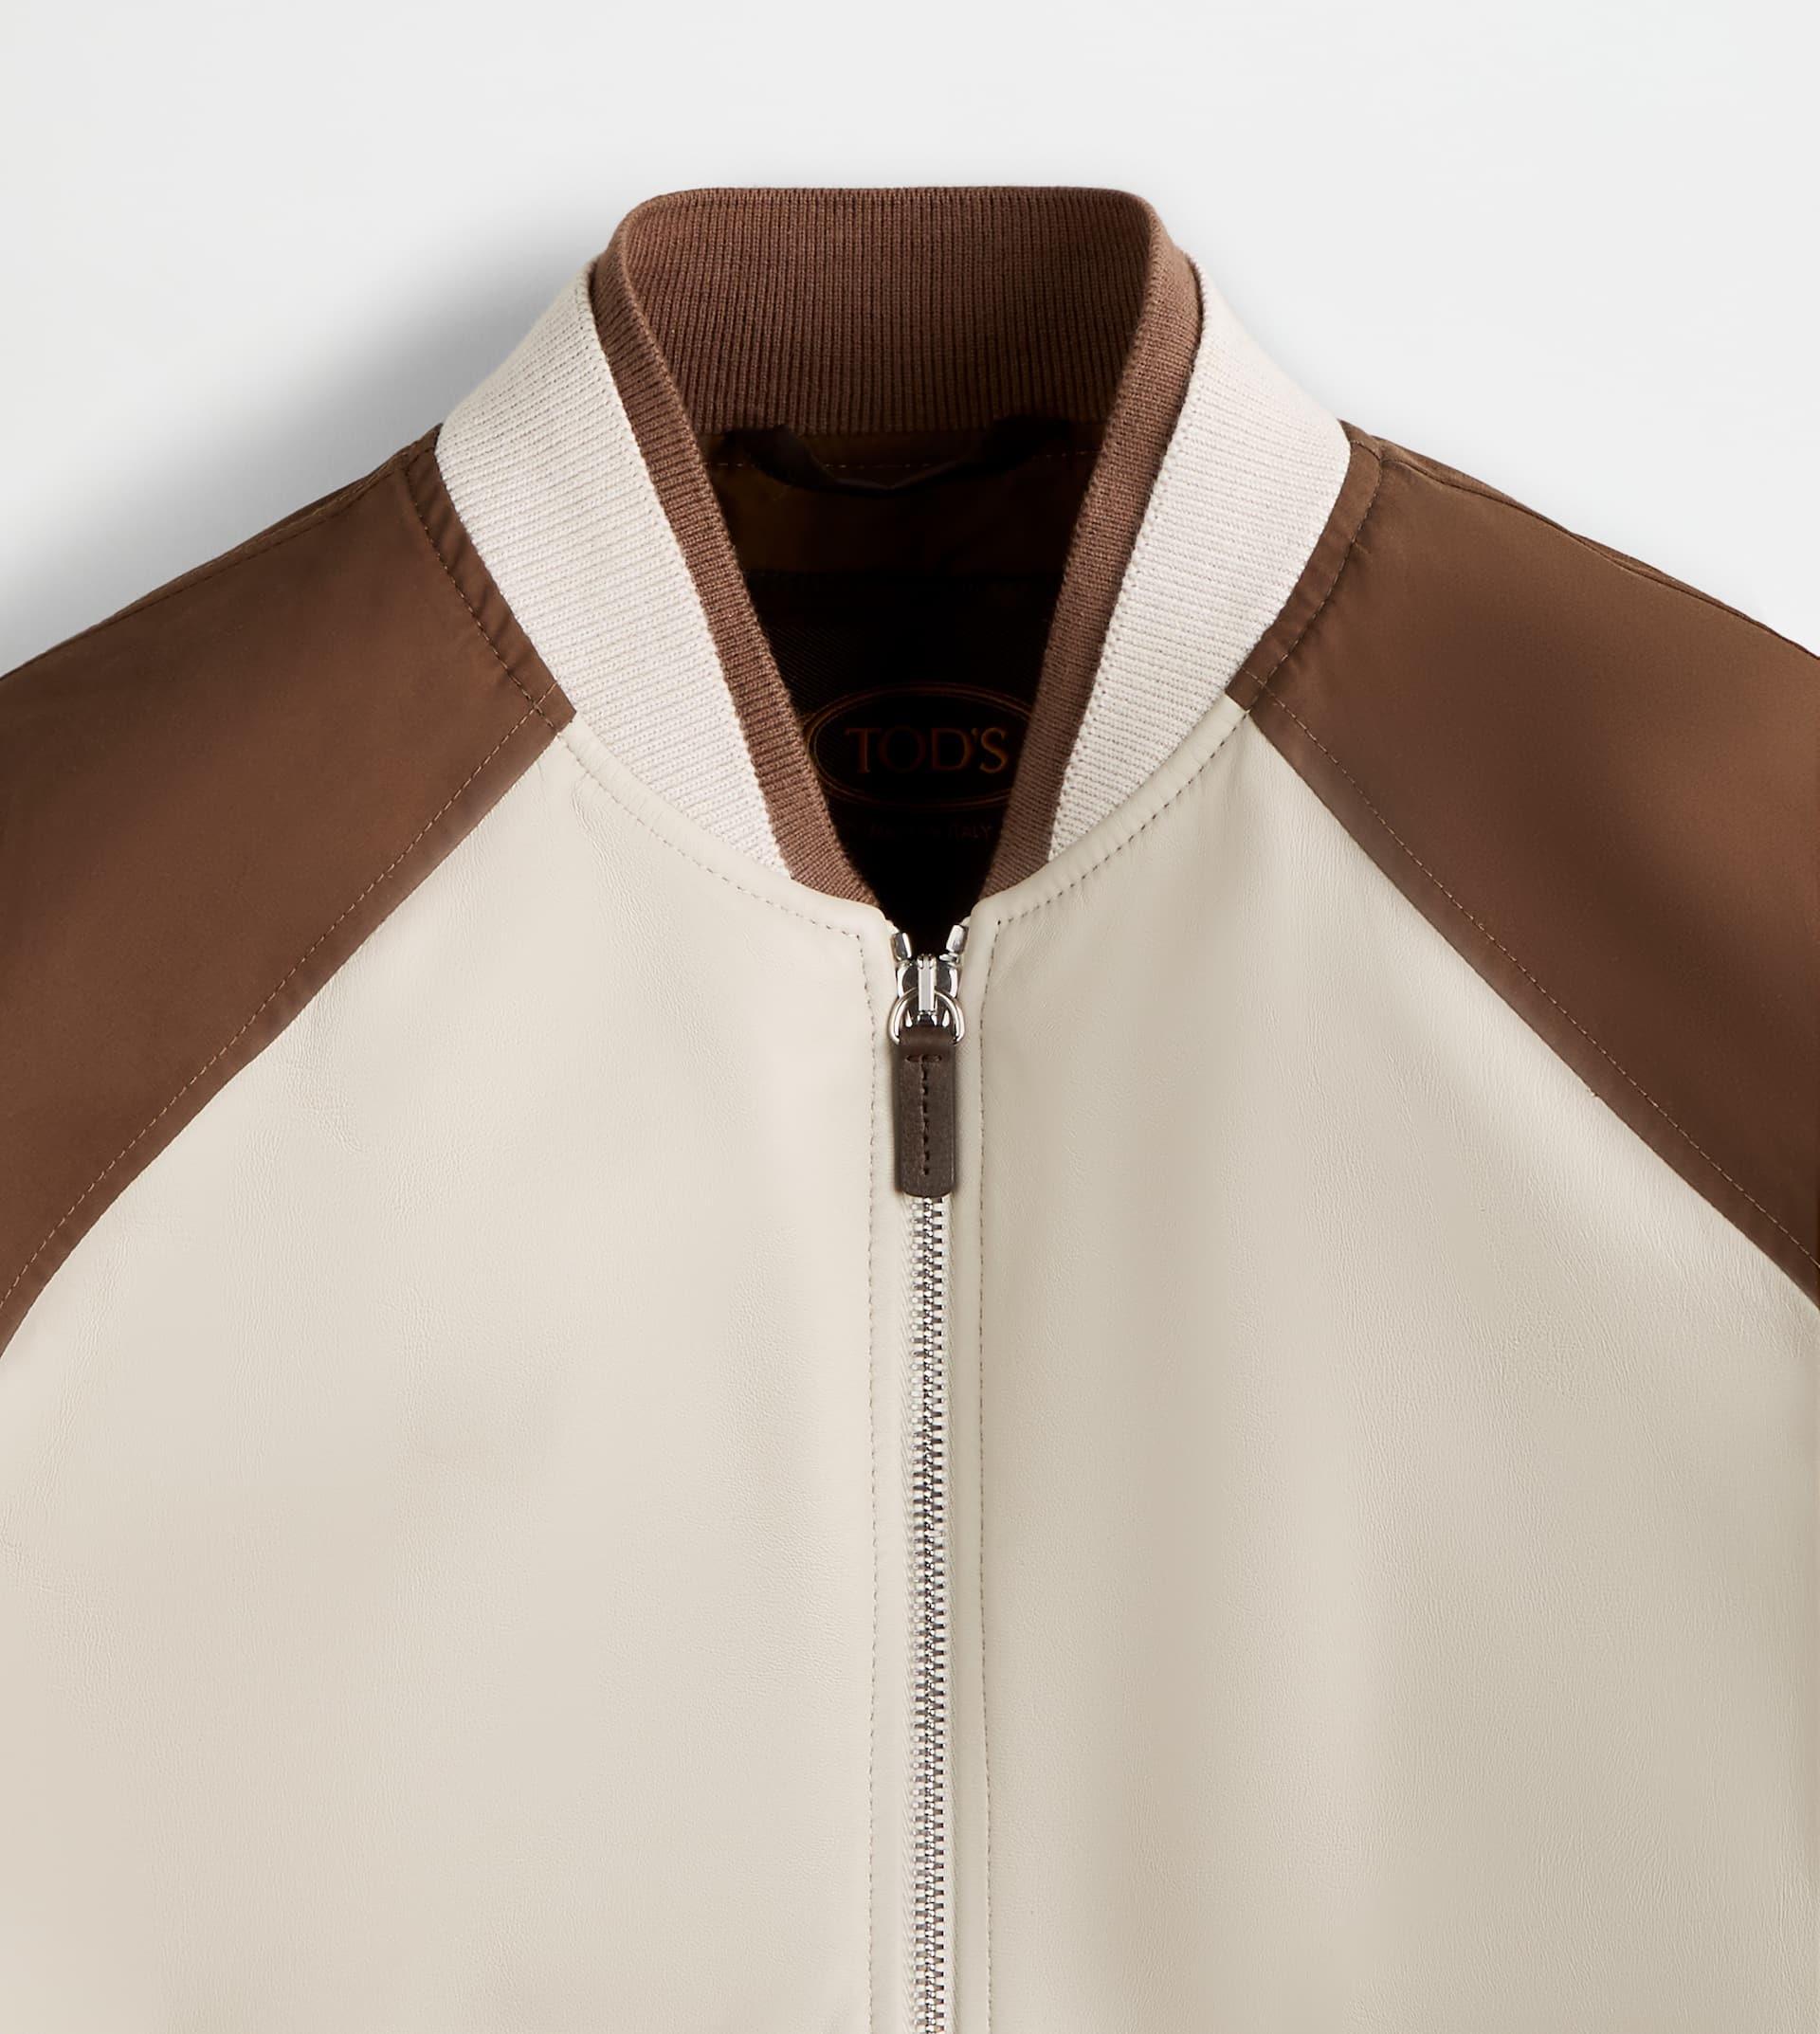 BOMBER JACKET IN LEATHER - BROWN, OFF WHITE - 8